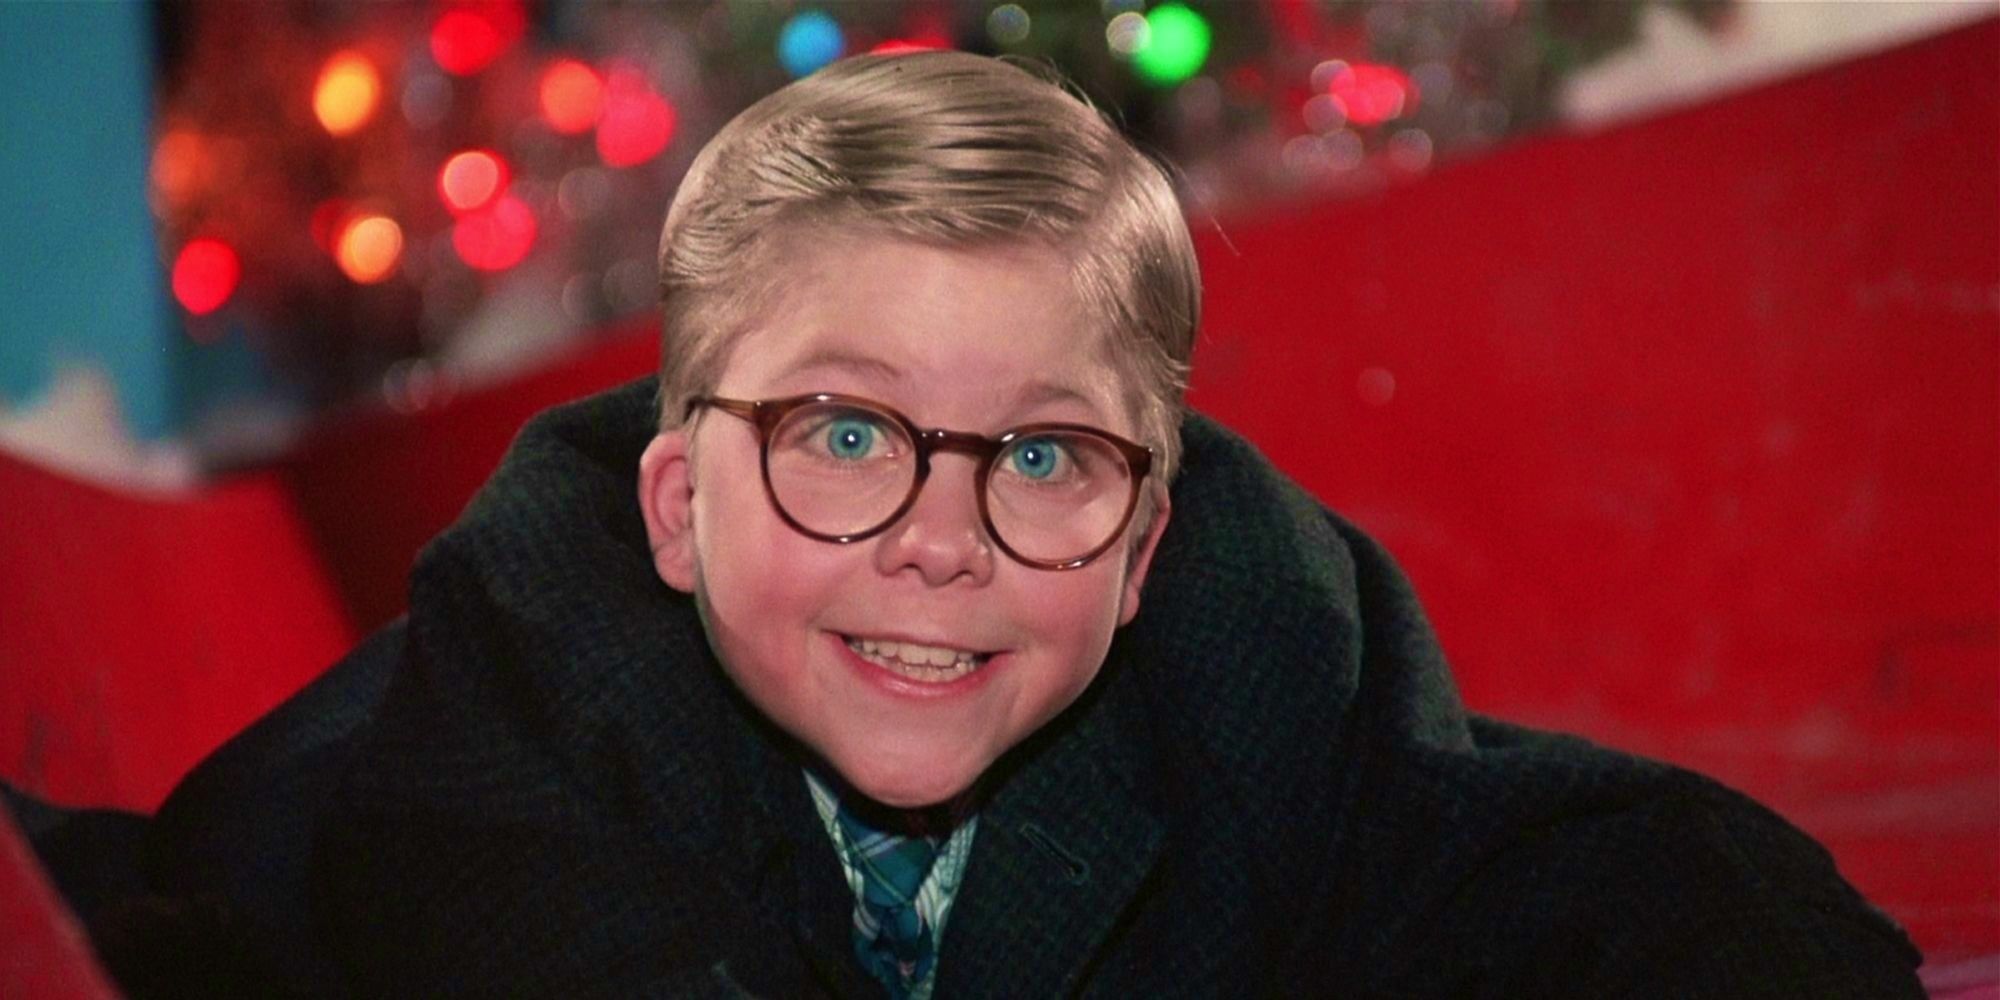 Ralphie smiling in A Christmas Story